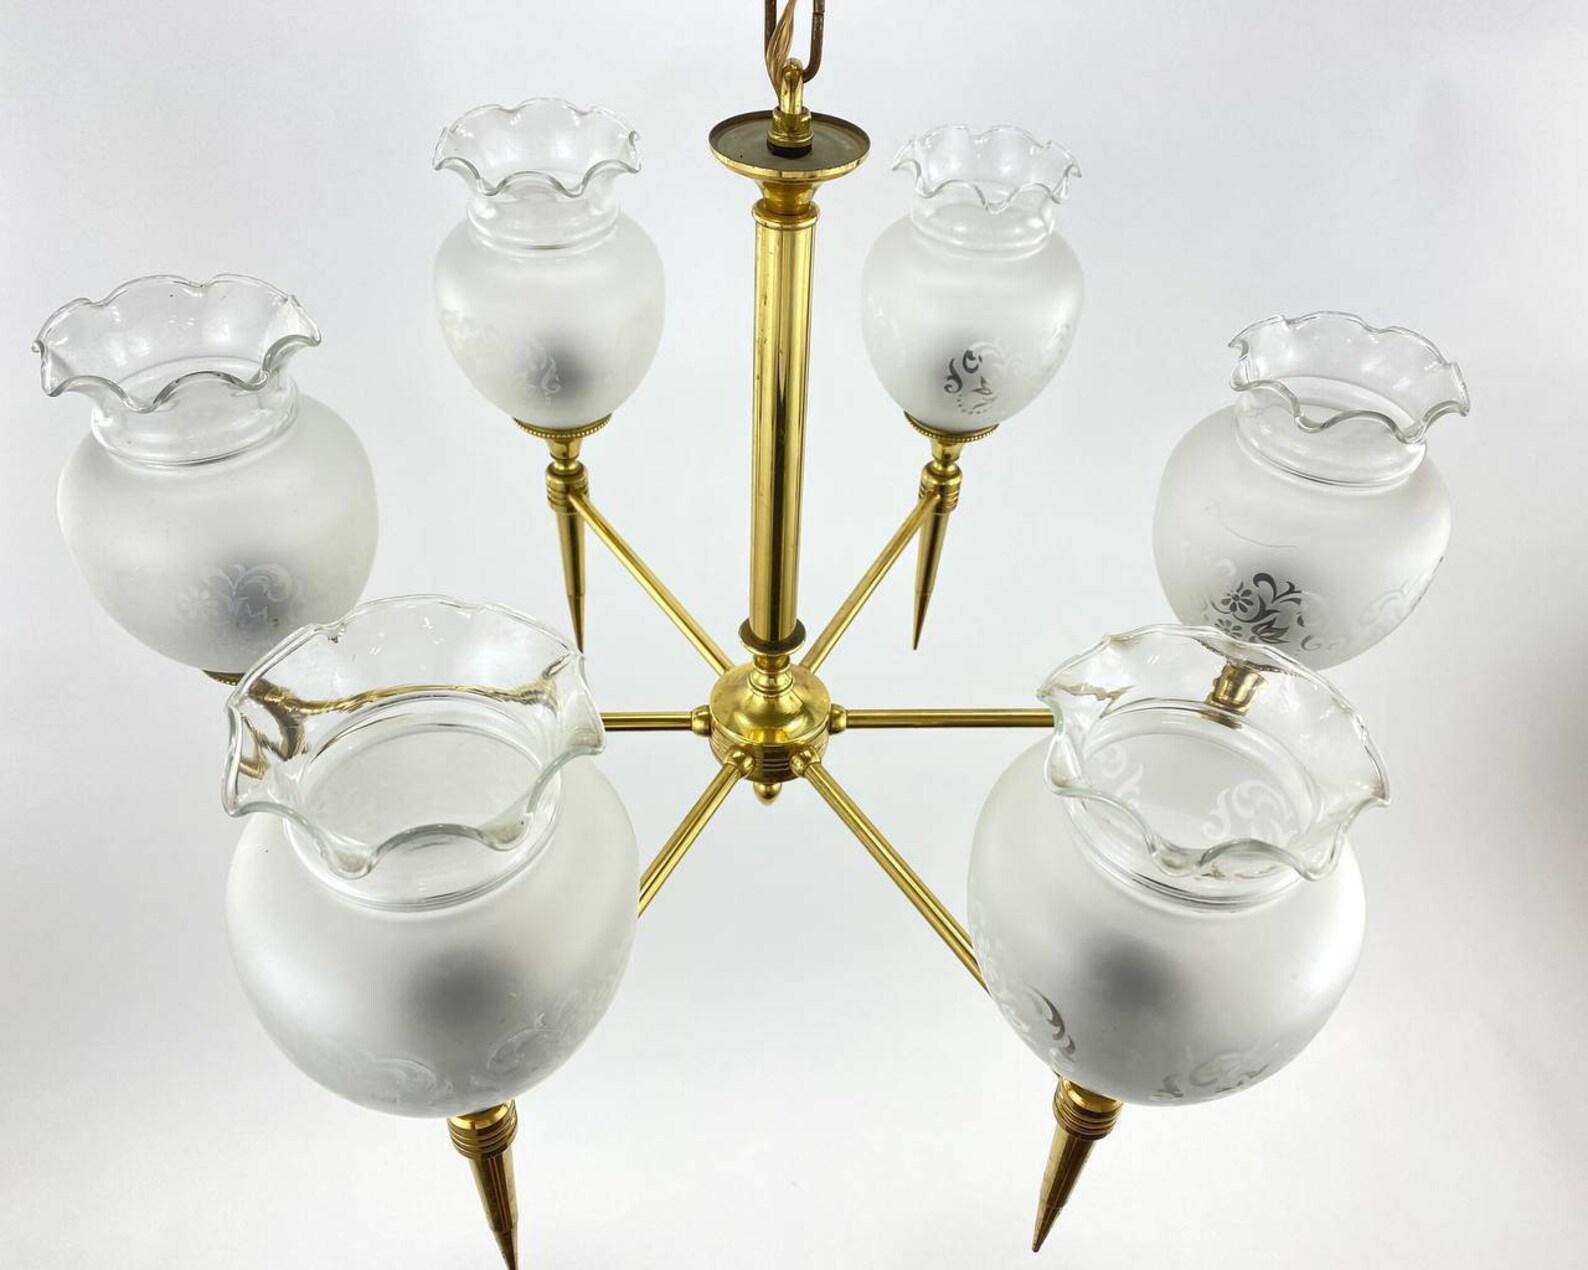 20th Century Vintage 6 Light Chandelier Brass and Frosted Glass Ceiling Lamp, France, 1970 For Sale